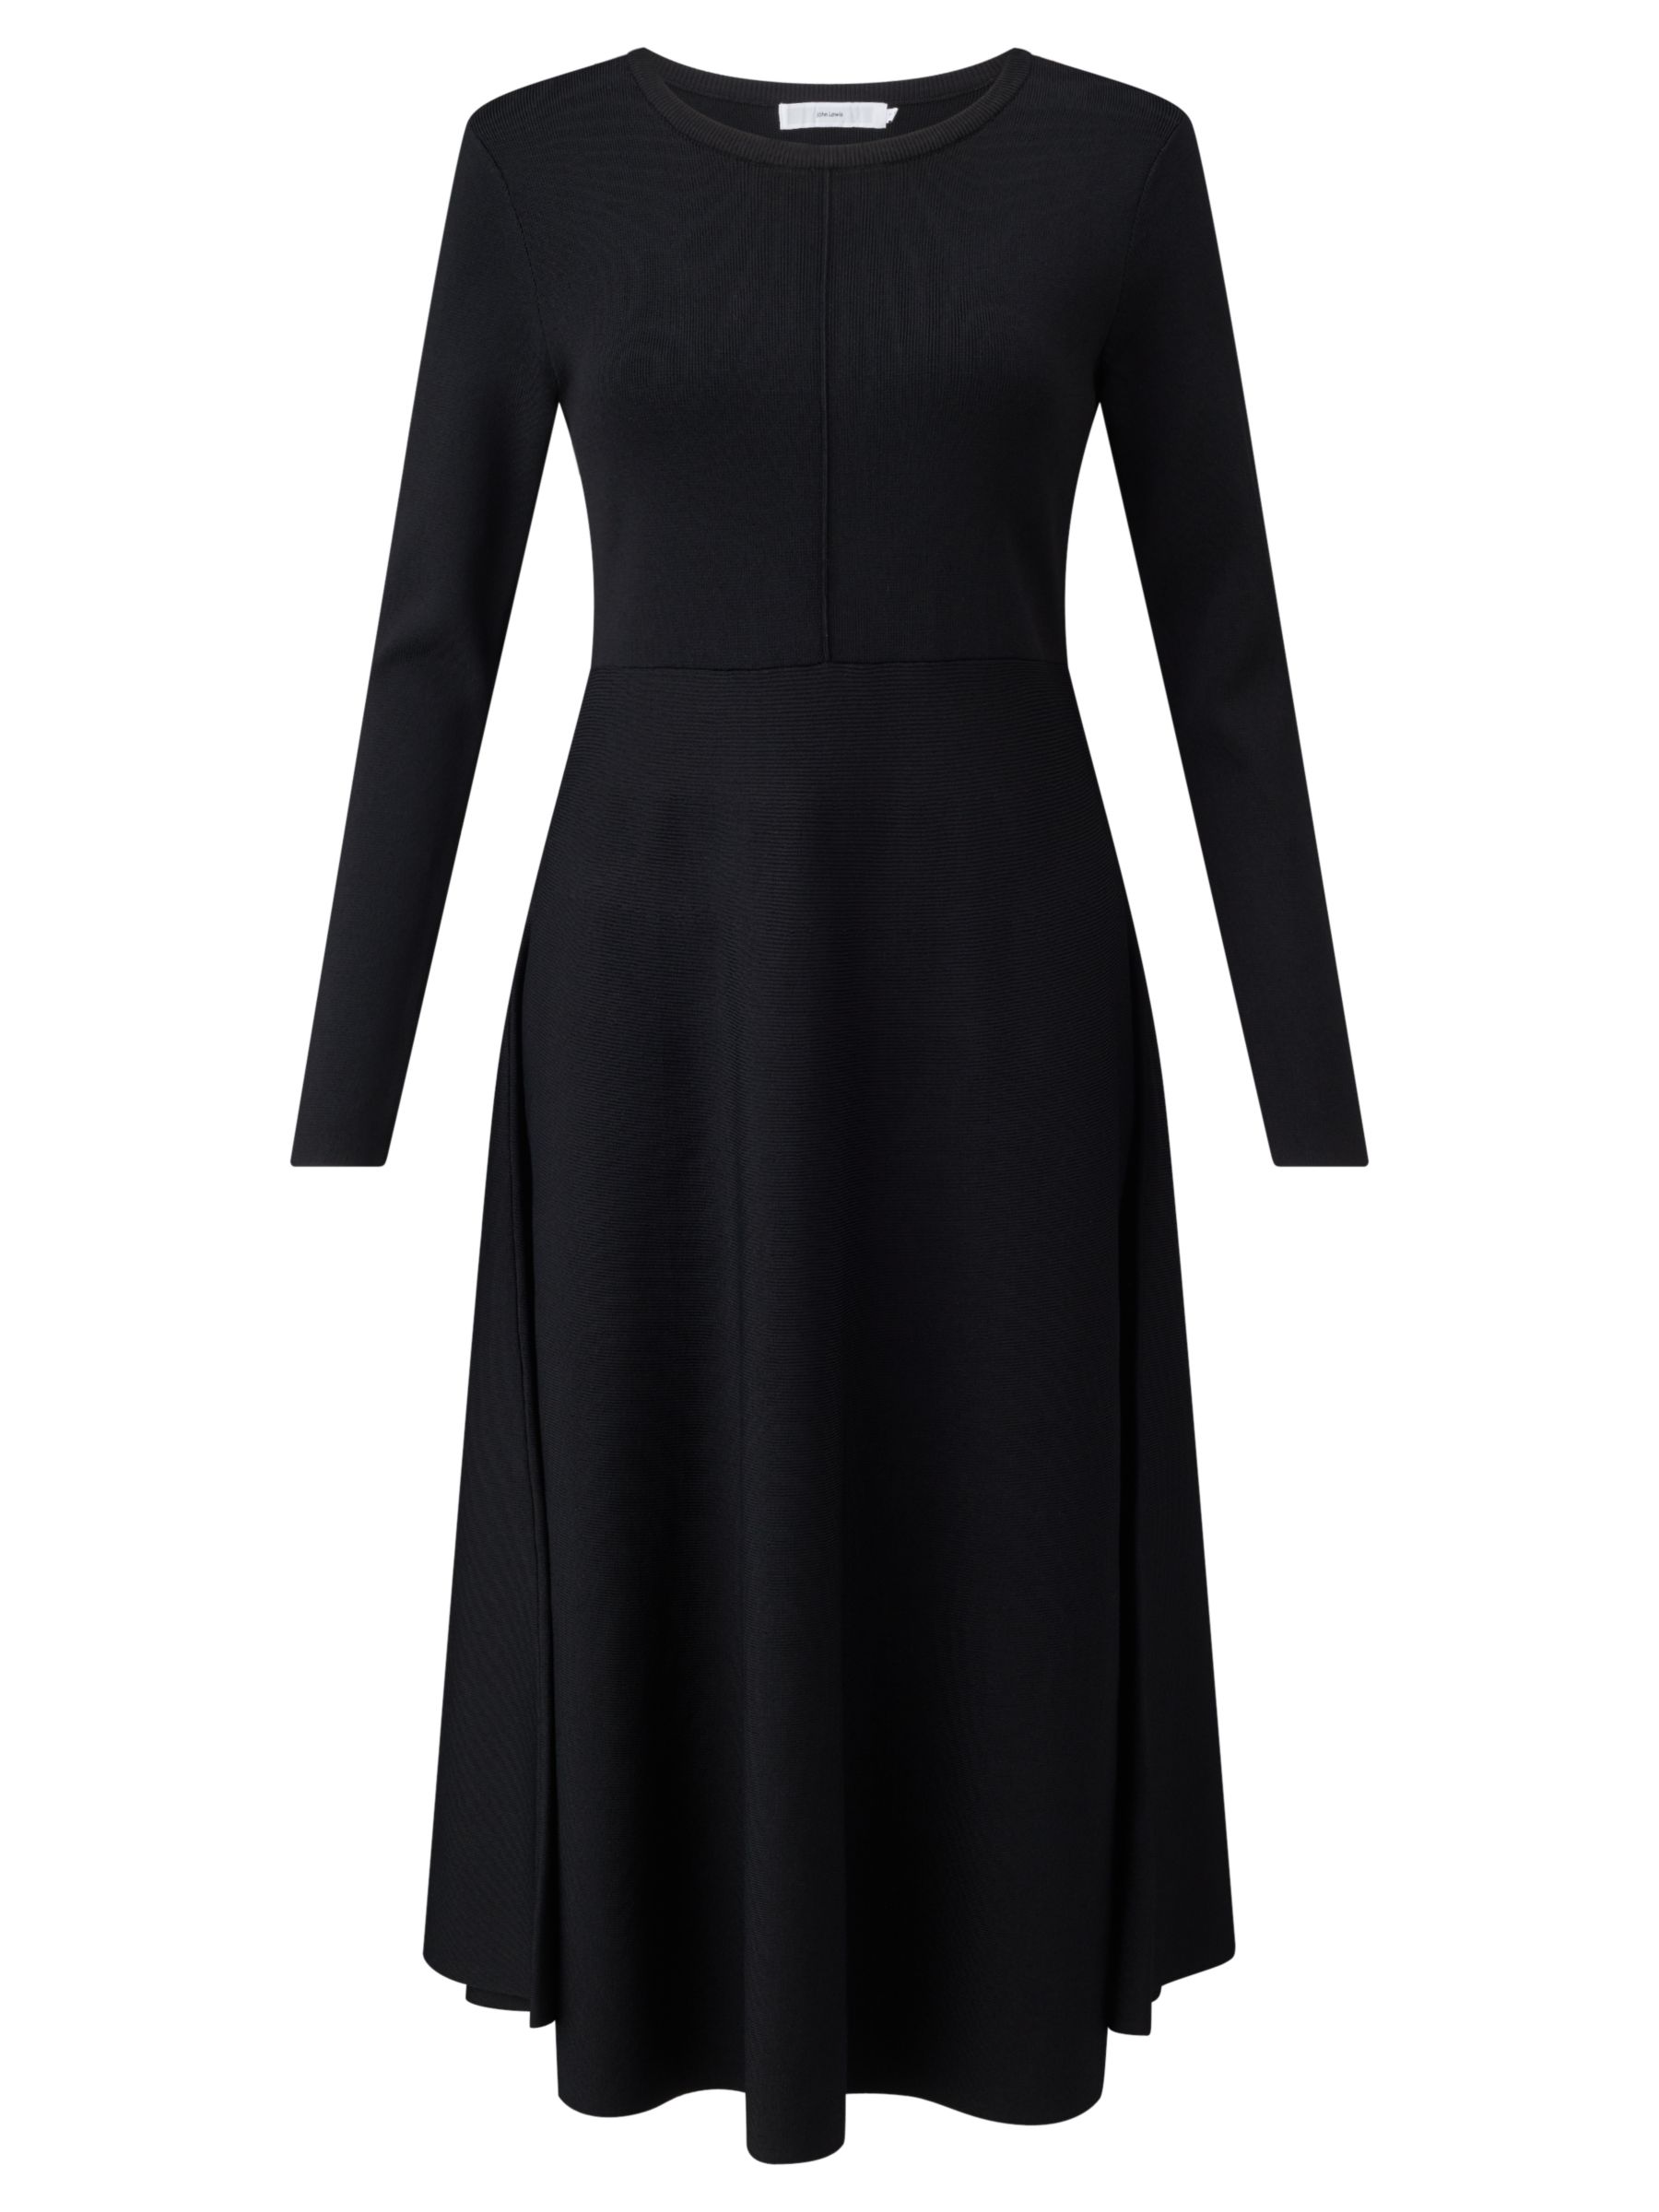 John Lewis Knitted Fit And Flare Dress, Black